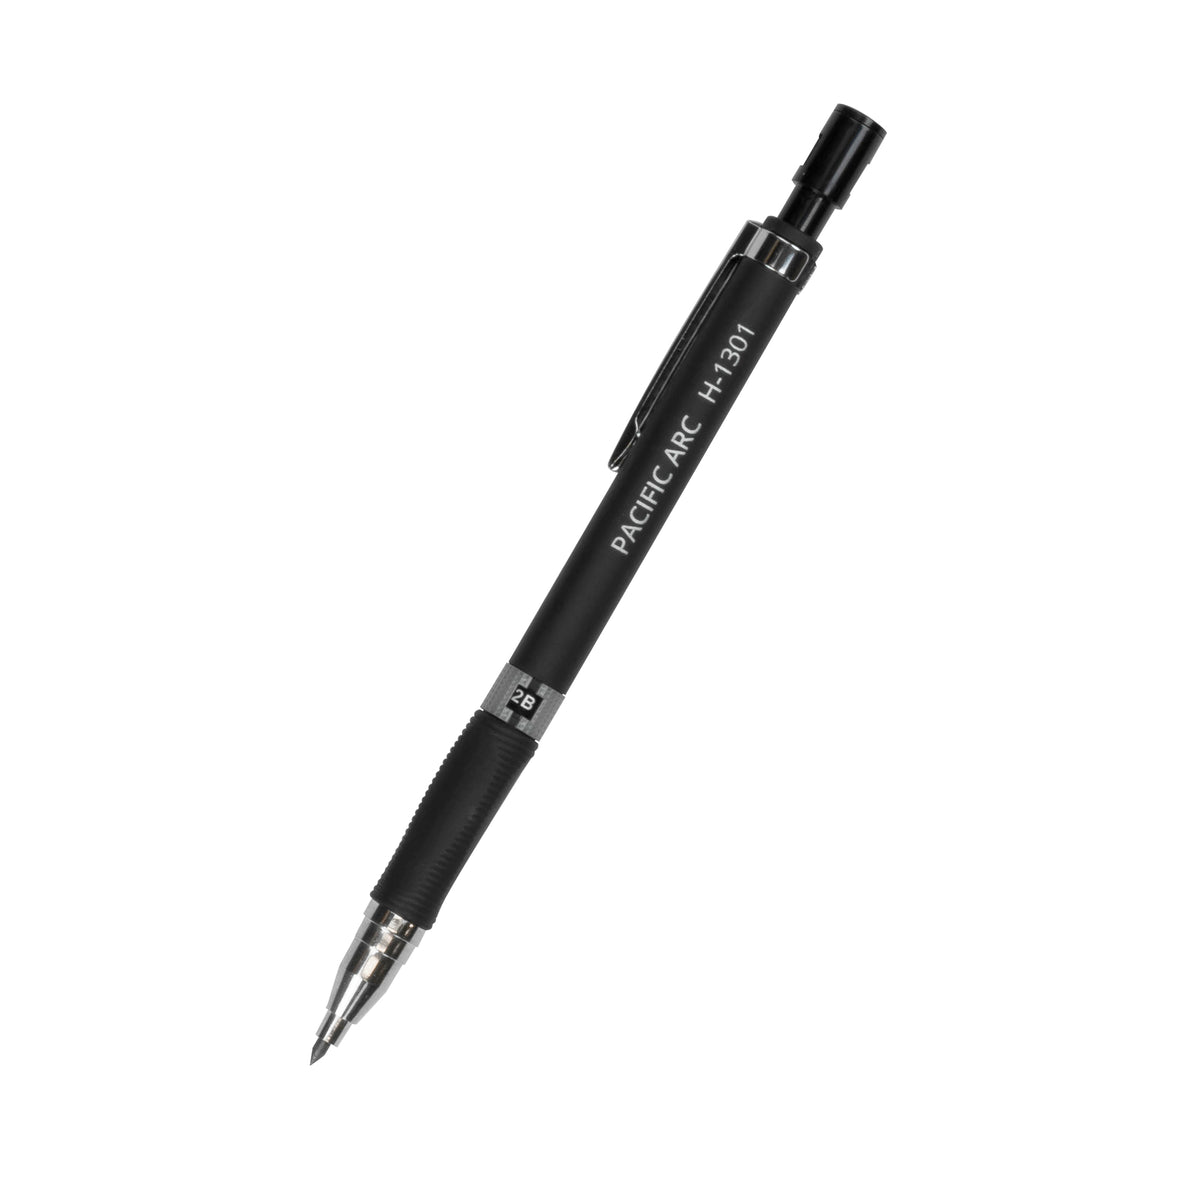 Pacific Arc, 2mm Collegiate Lead Holder and Lead Sharpener, Drafting Pencil for Artist Drawing, Drafting, and Sketching